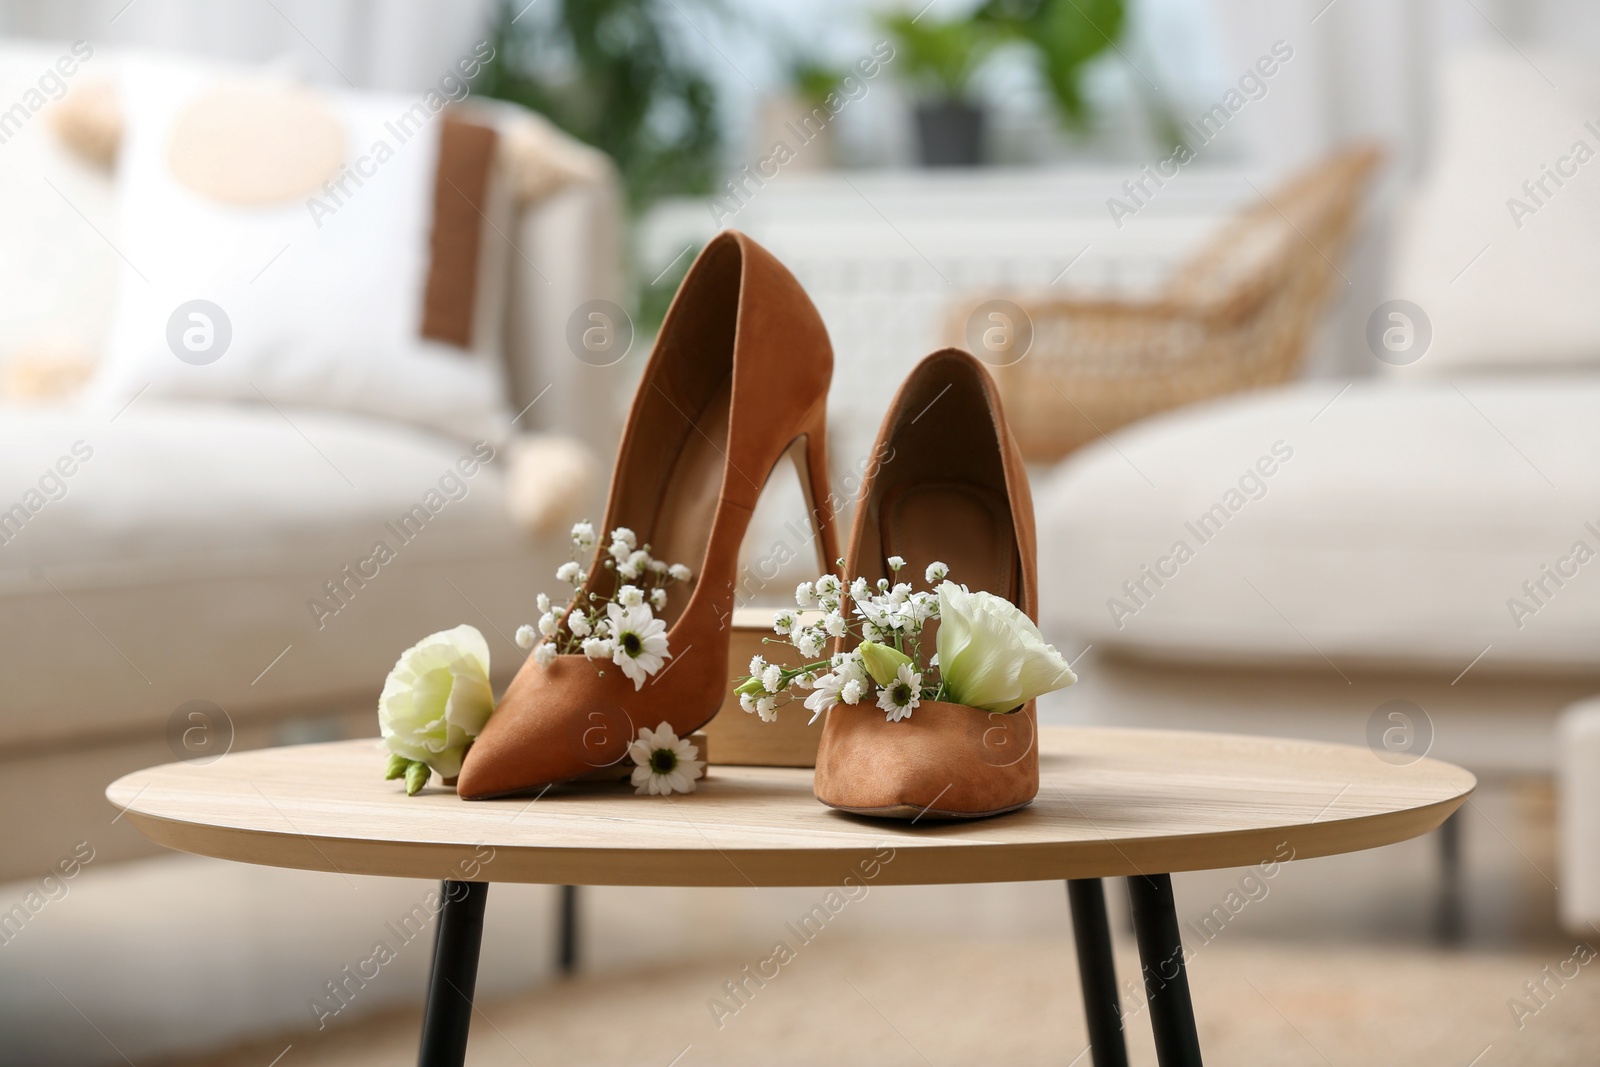 Photo of Women's shoes with beautiful flowers on table indoors